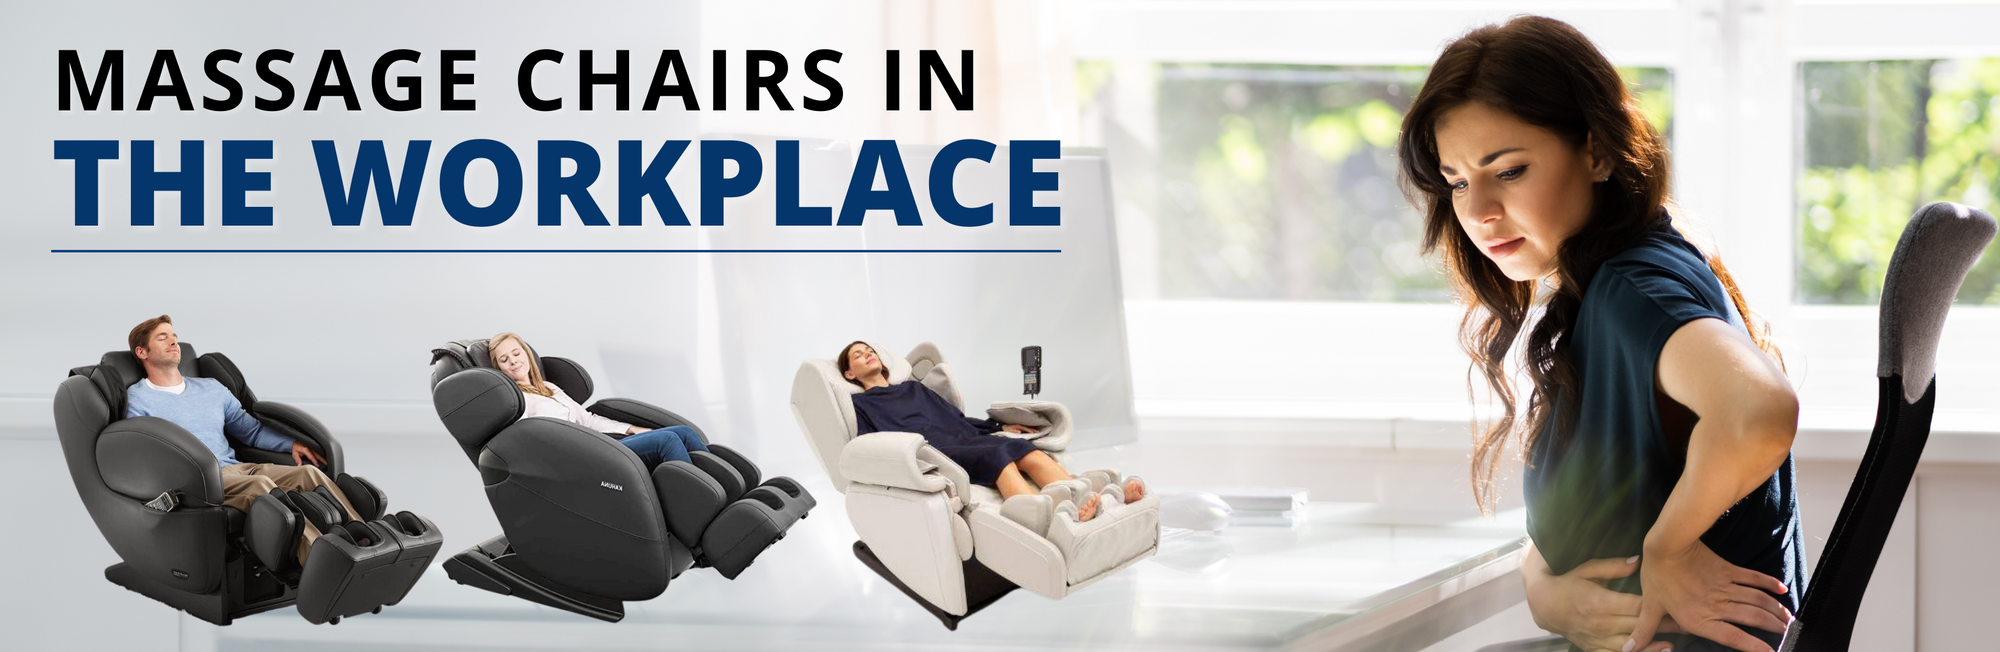 Massage chairs can have a positive impact on your employees with Improved Productivity, Pain Relief, and reduced Stress.